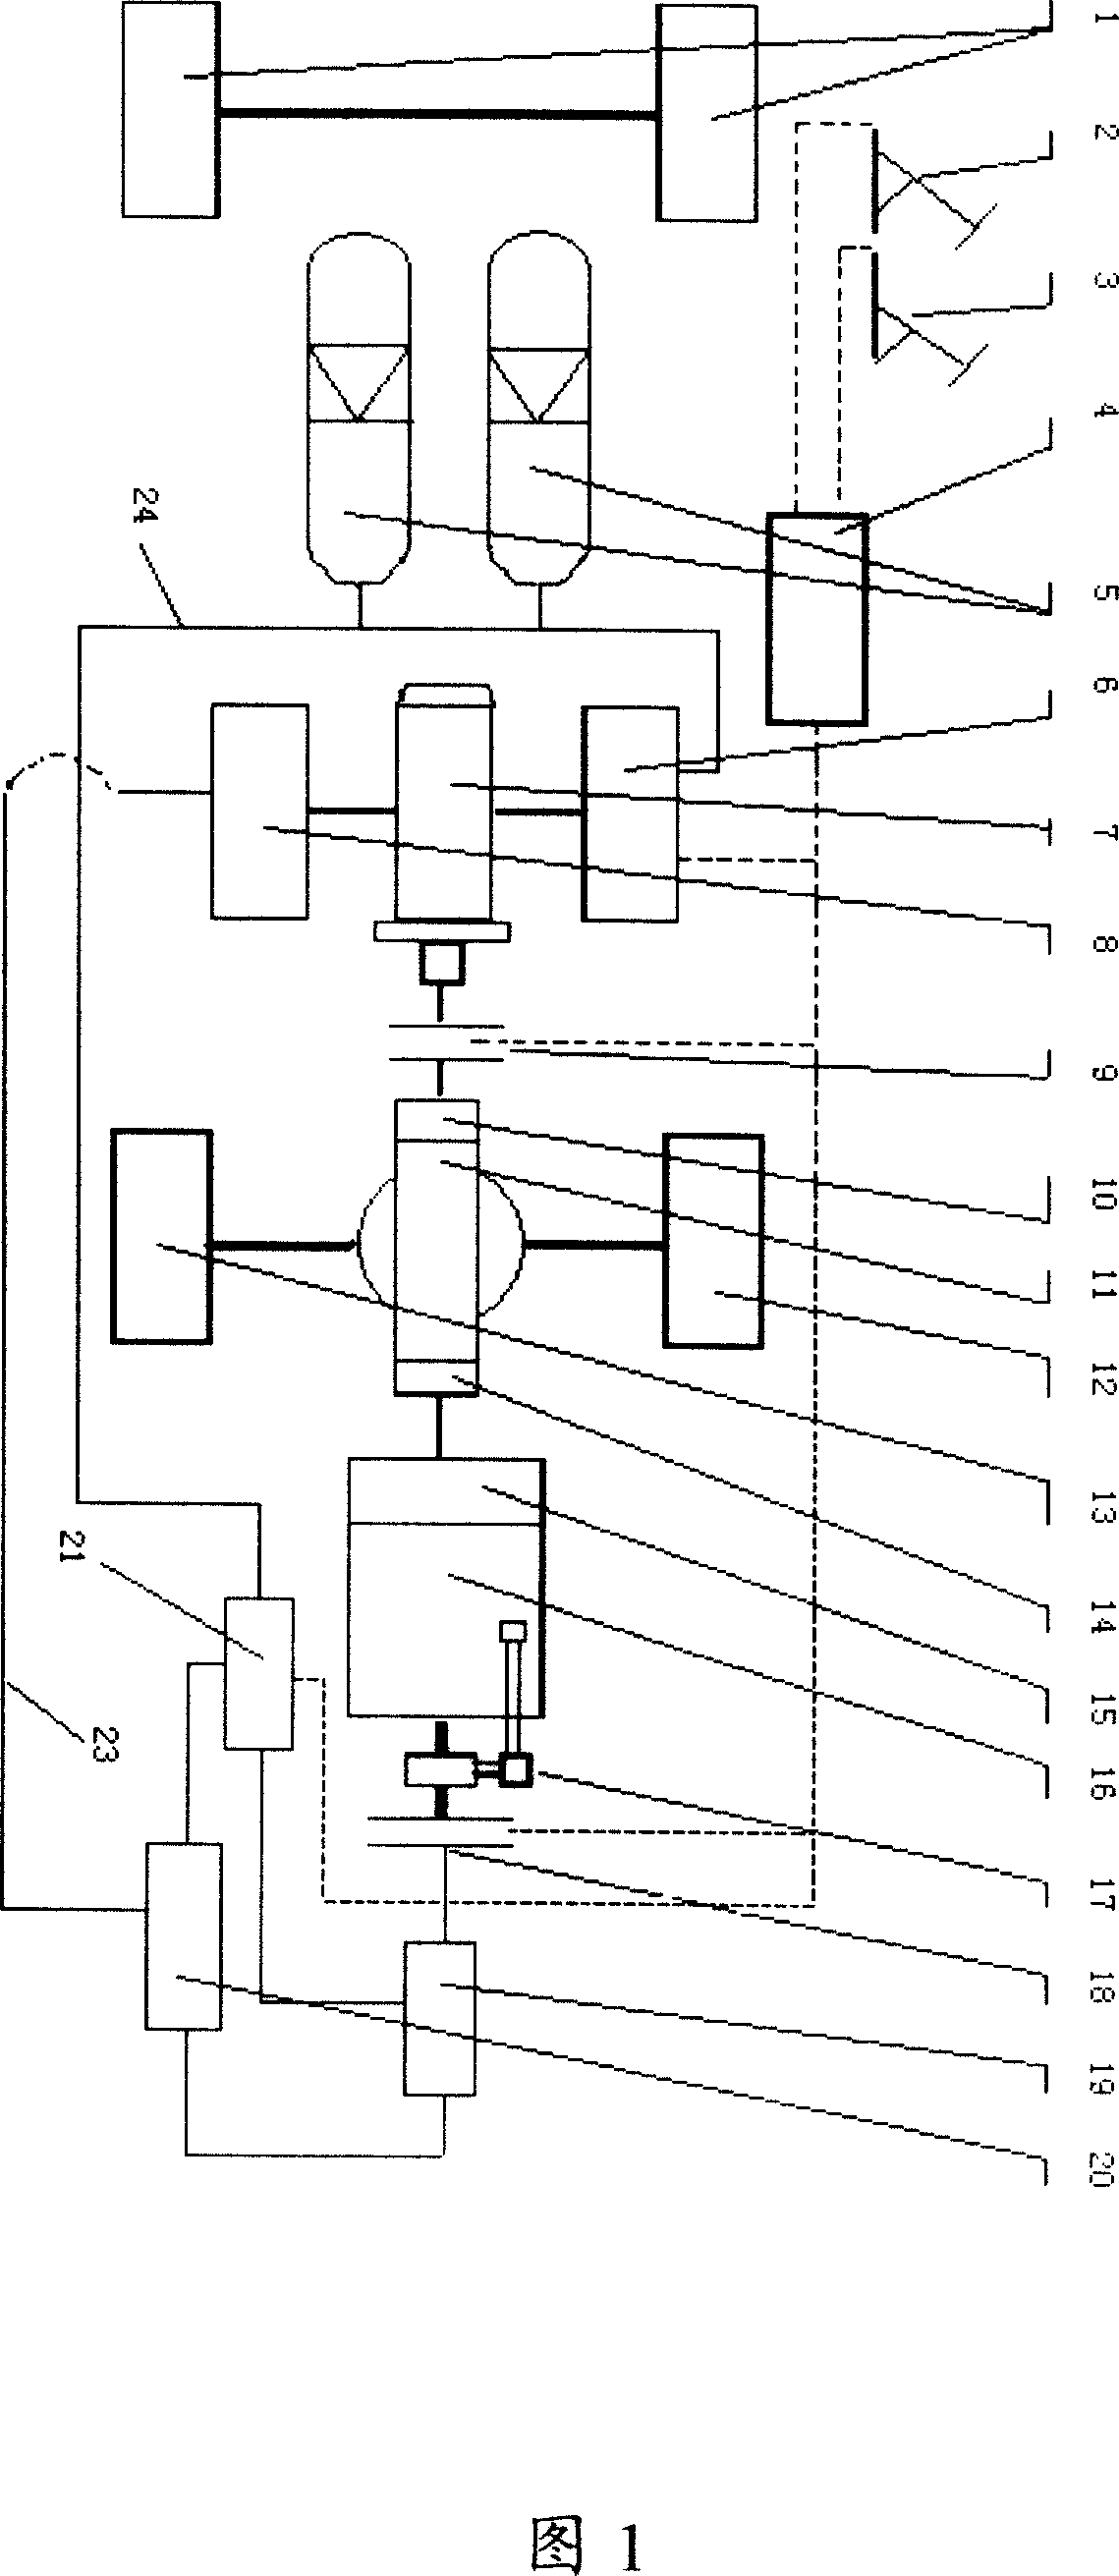 Rear driven mixed power vehicle of motor hydraulic device connection type